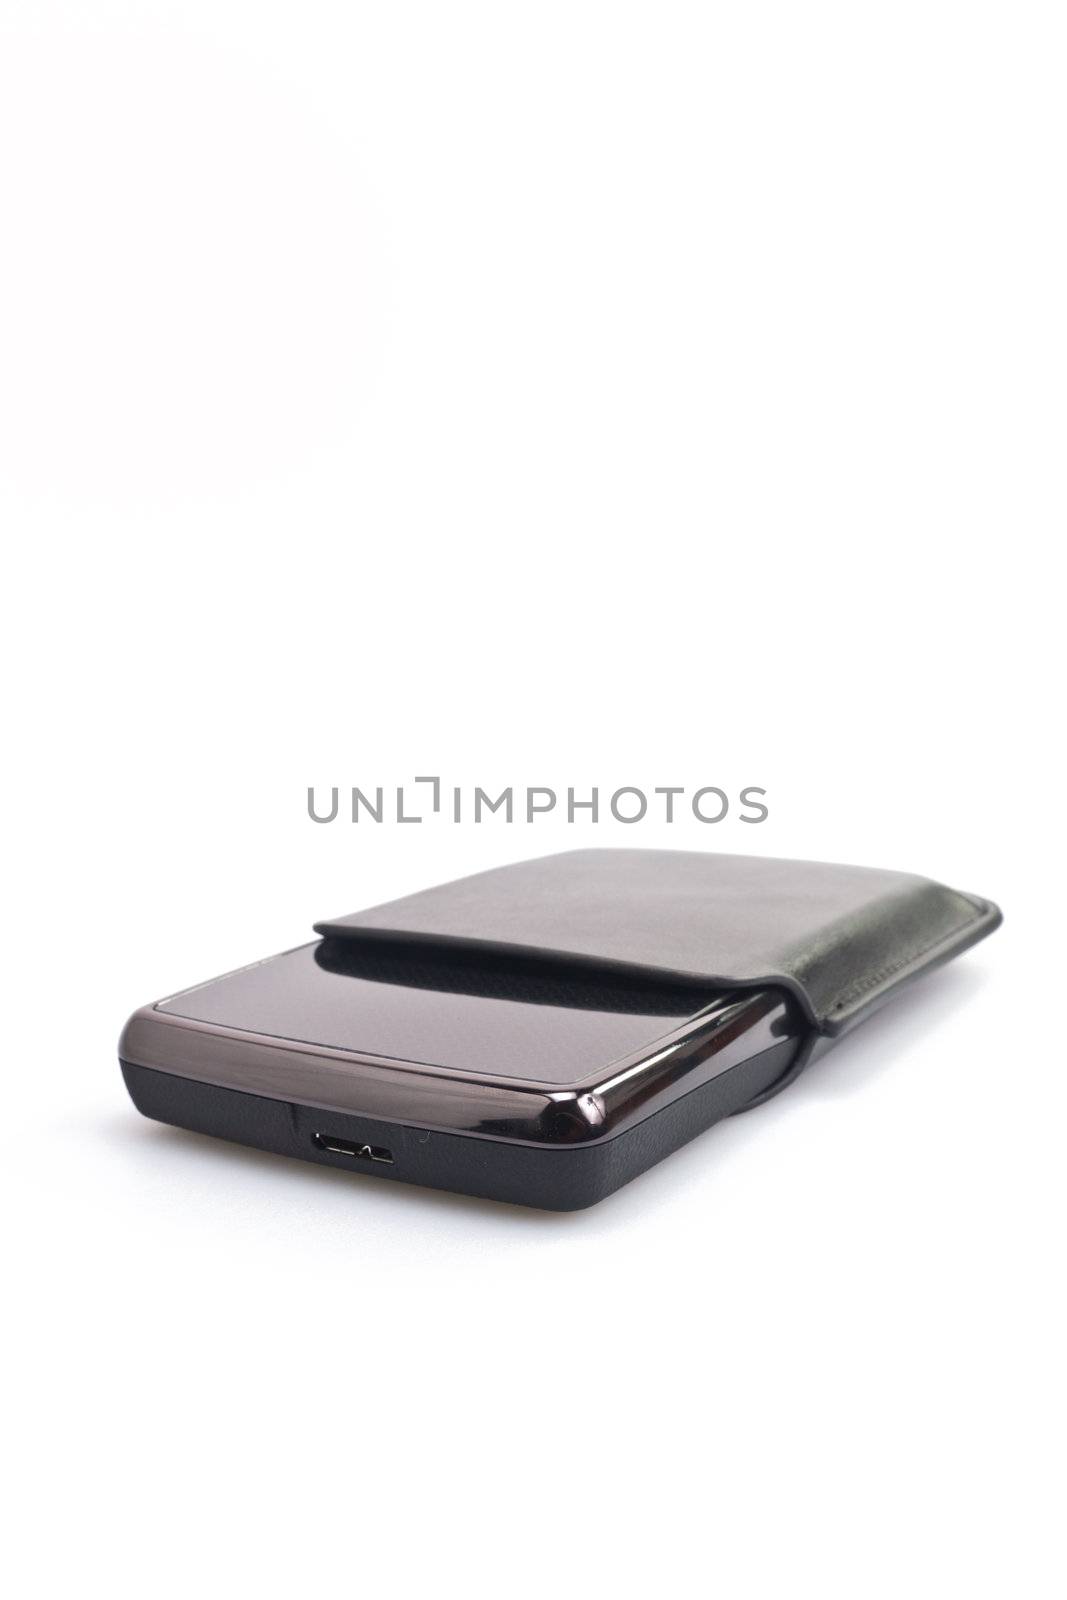 angled view of a portable harddisk with soft leather case on white background in portrait orientation